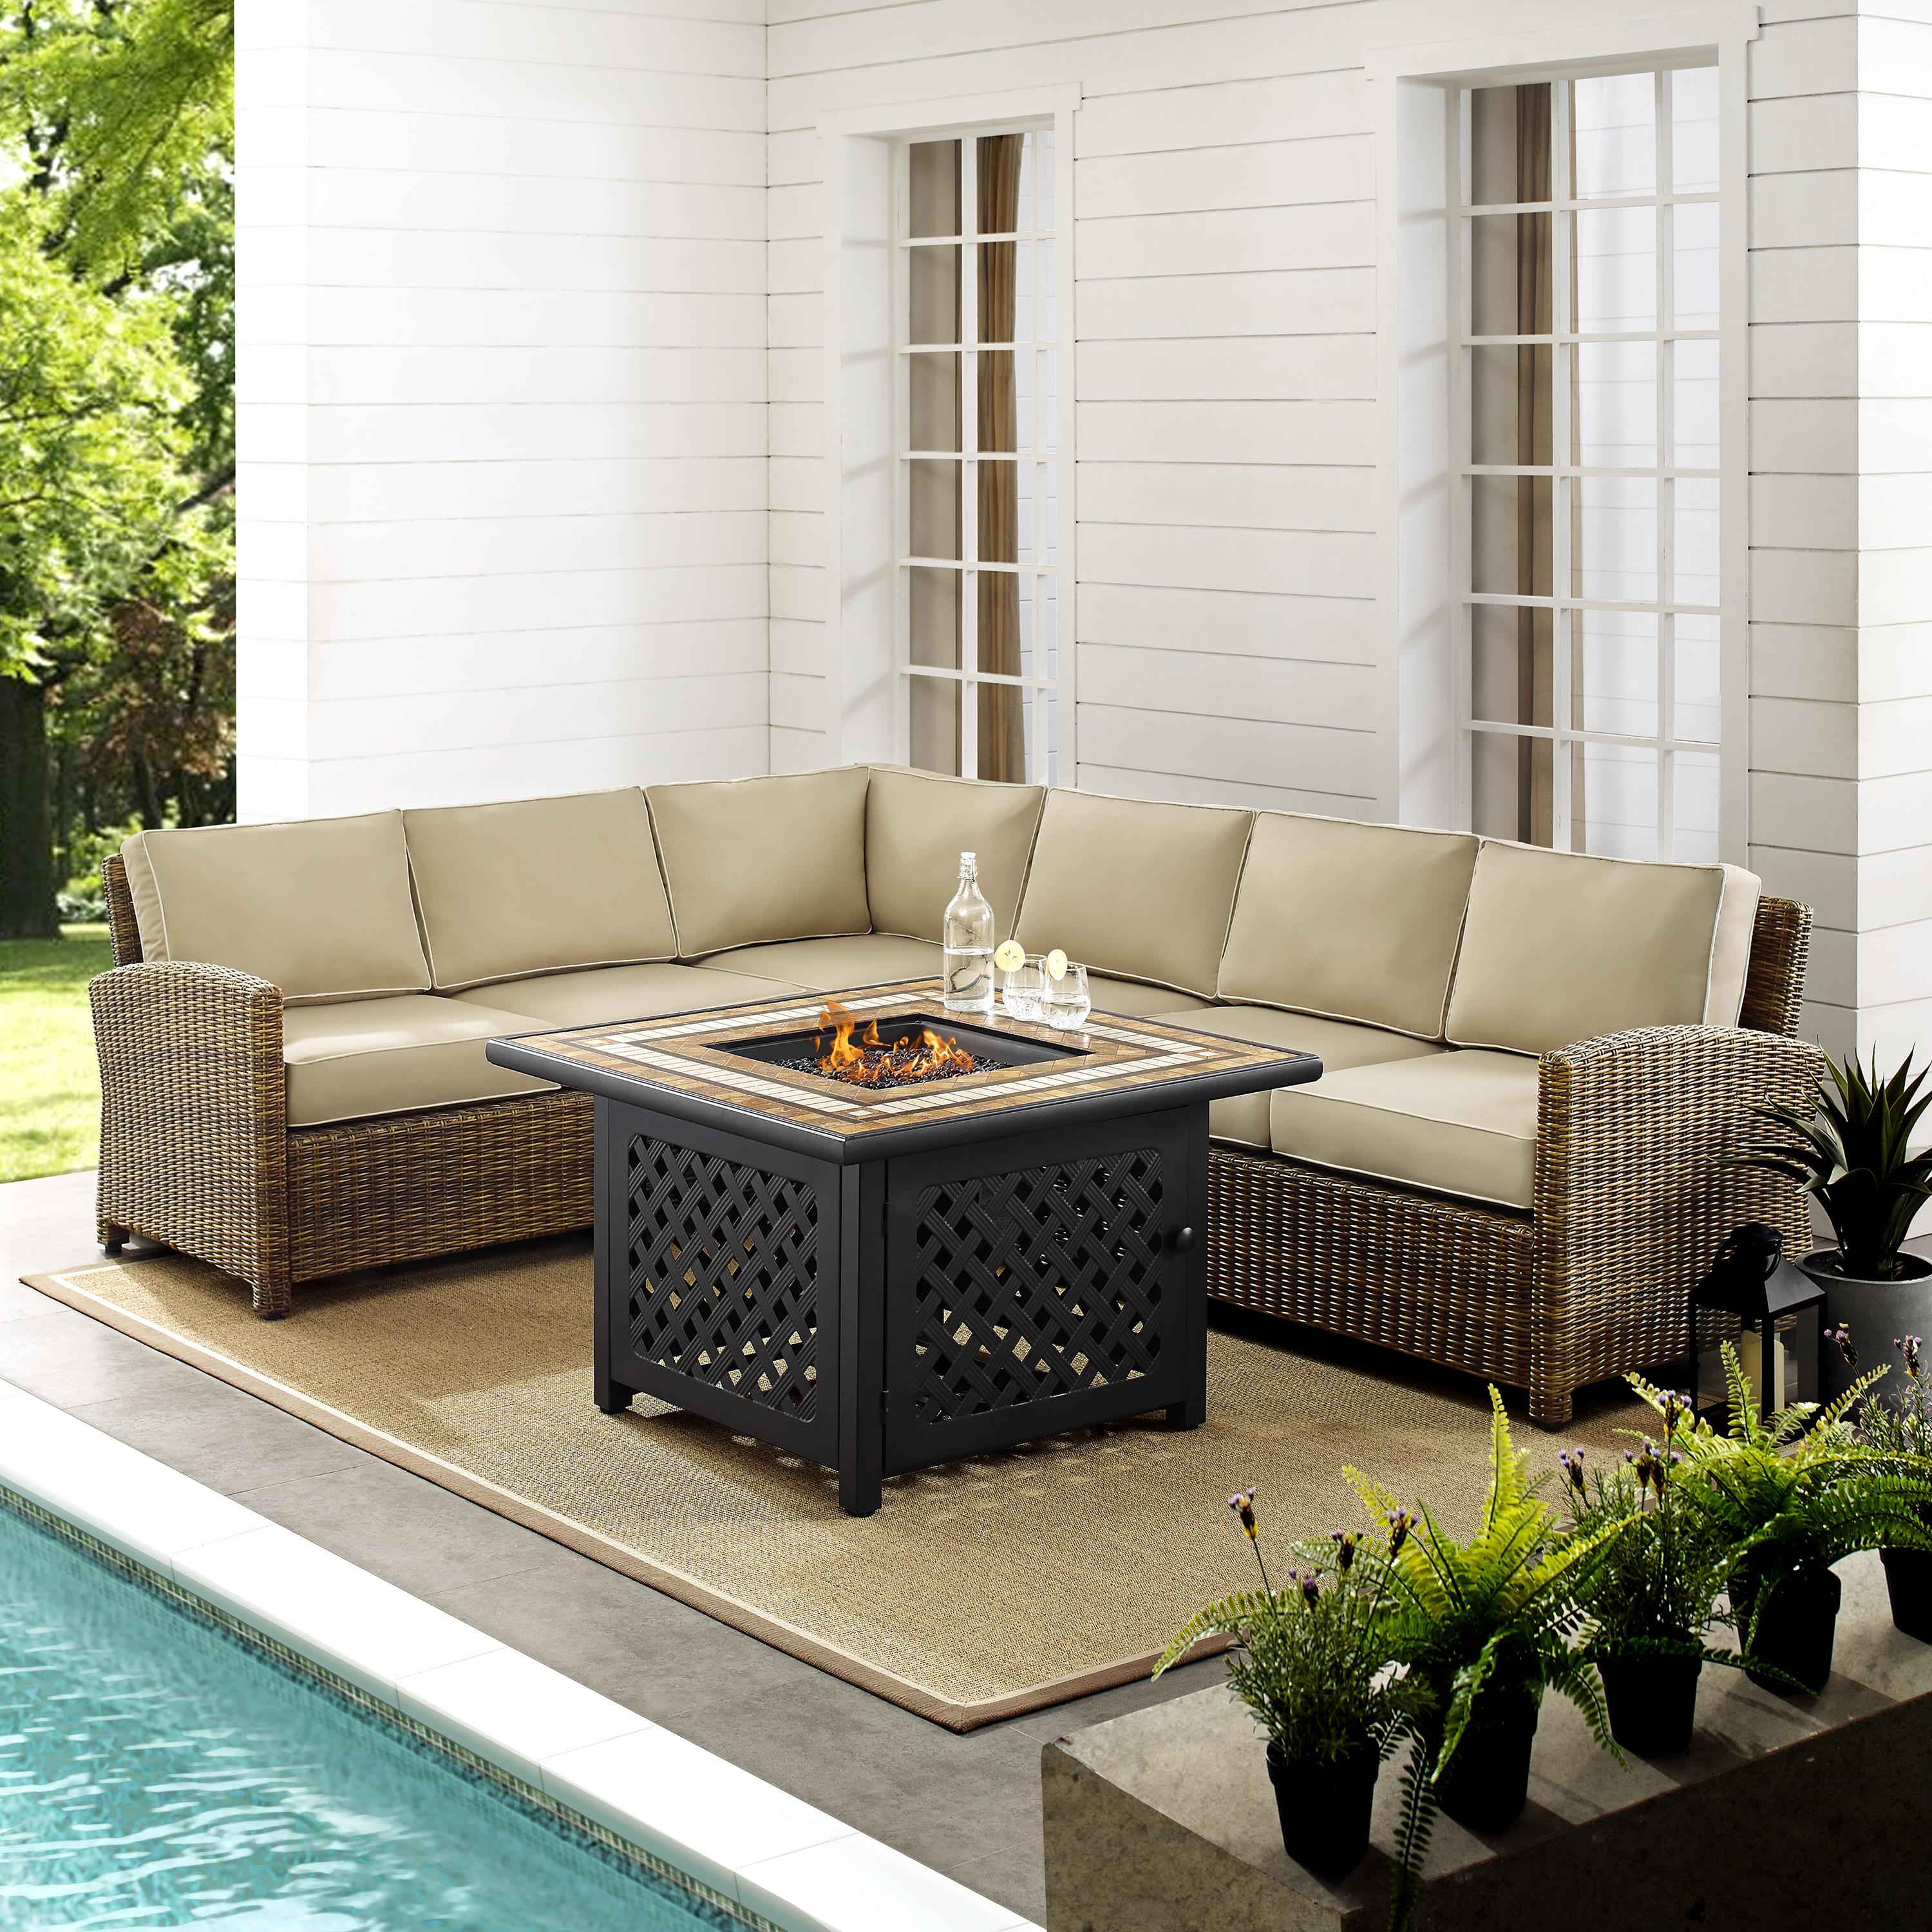 Bradenton 5Pc Outdoor Wicker Sectional Set W/Fire Table Weathered Brown/Sand - Right Corner Loveseat, Left Corner Loveseat, Corner Chair, Center Chair, & Tucson Fire Table - image 5 of 9